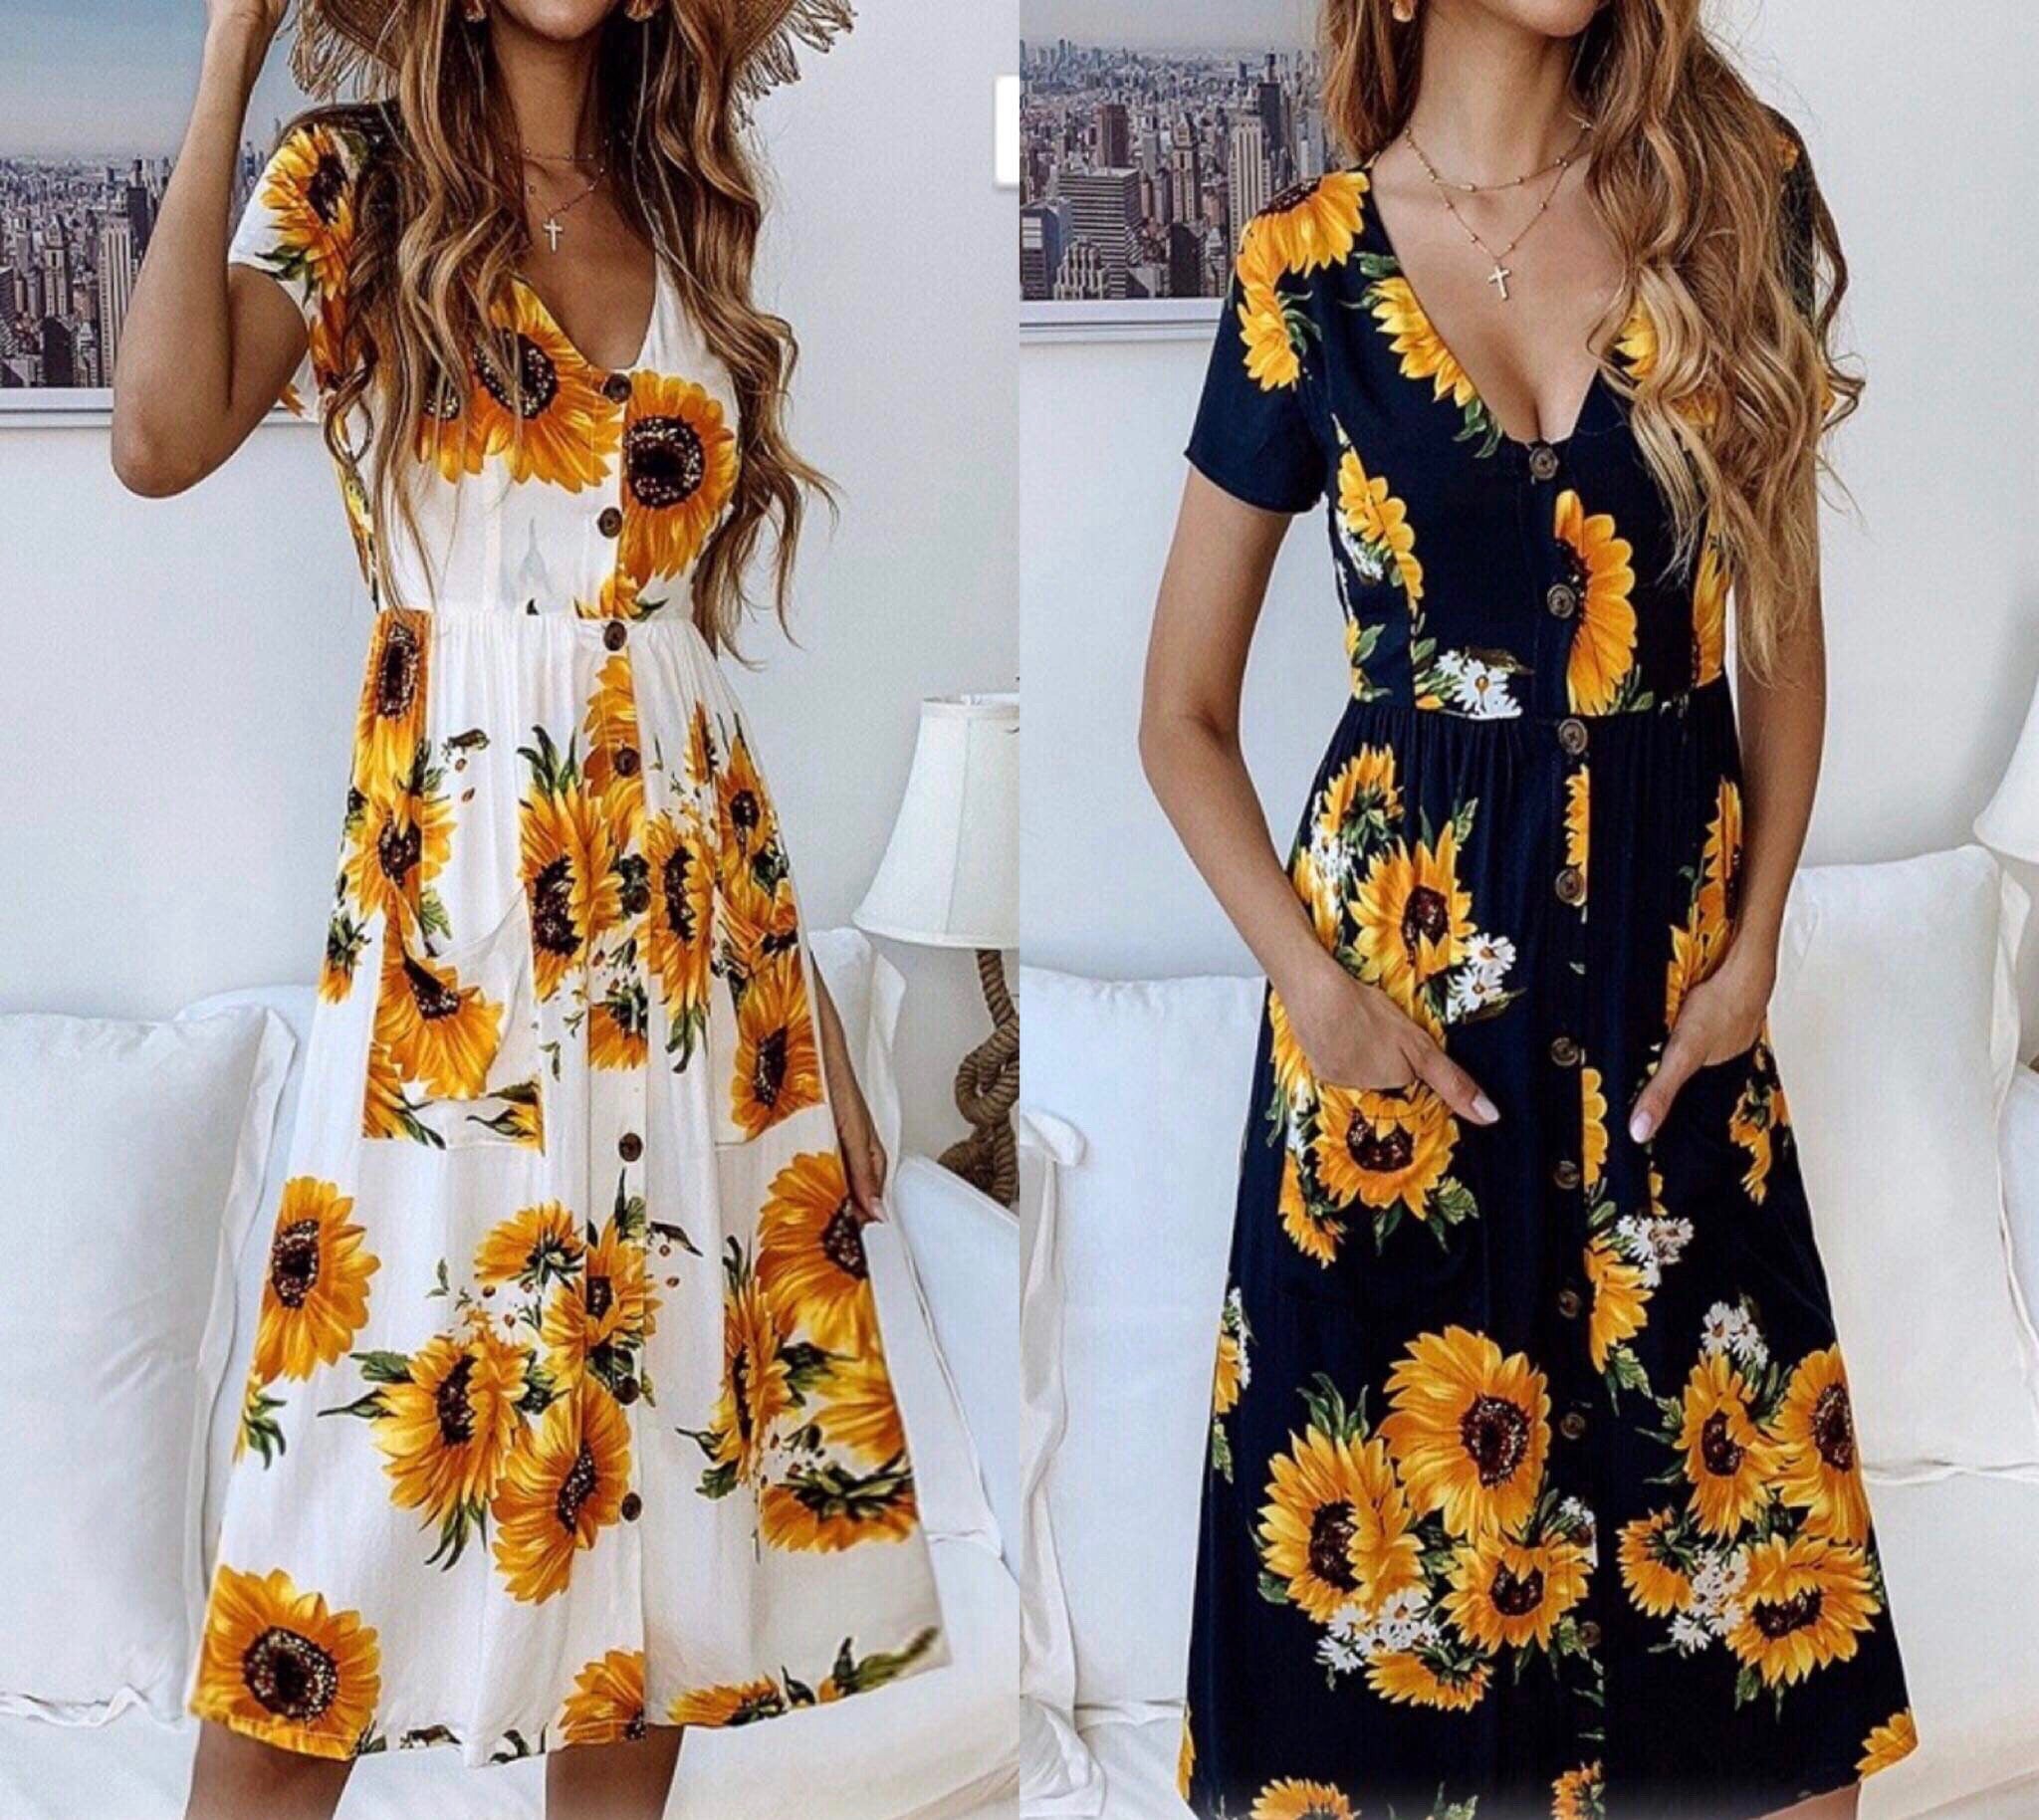 white sundress with sunflowers